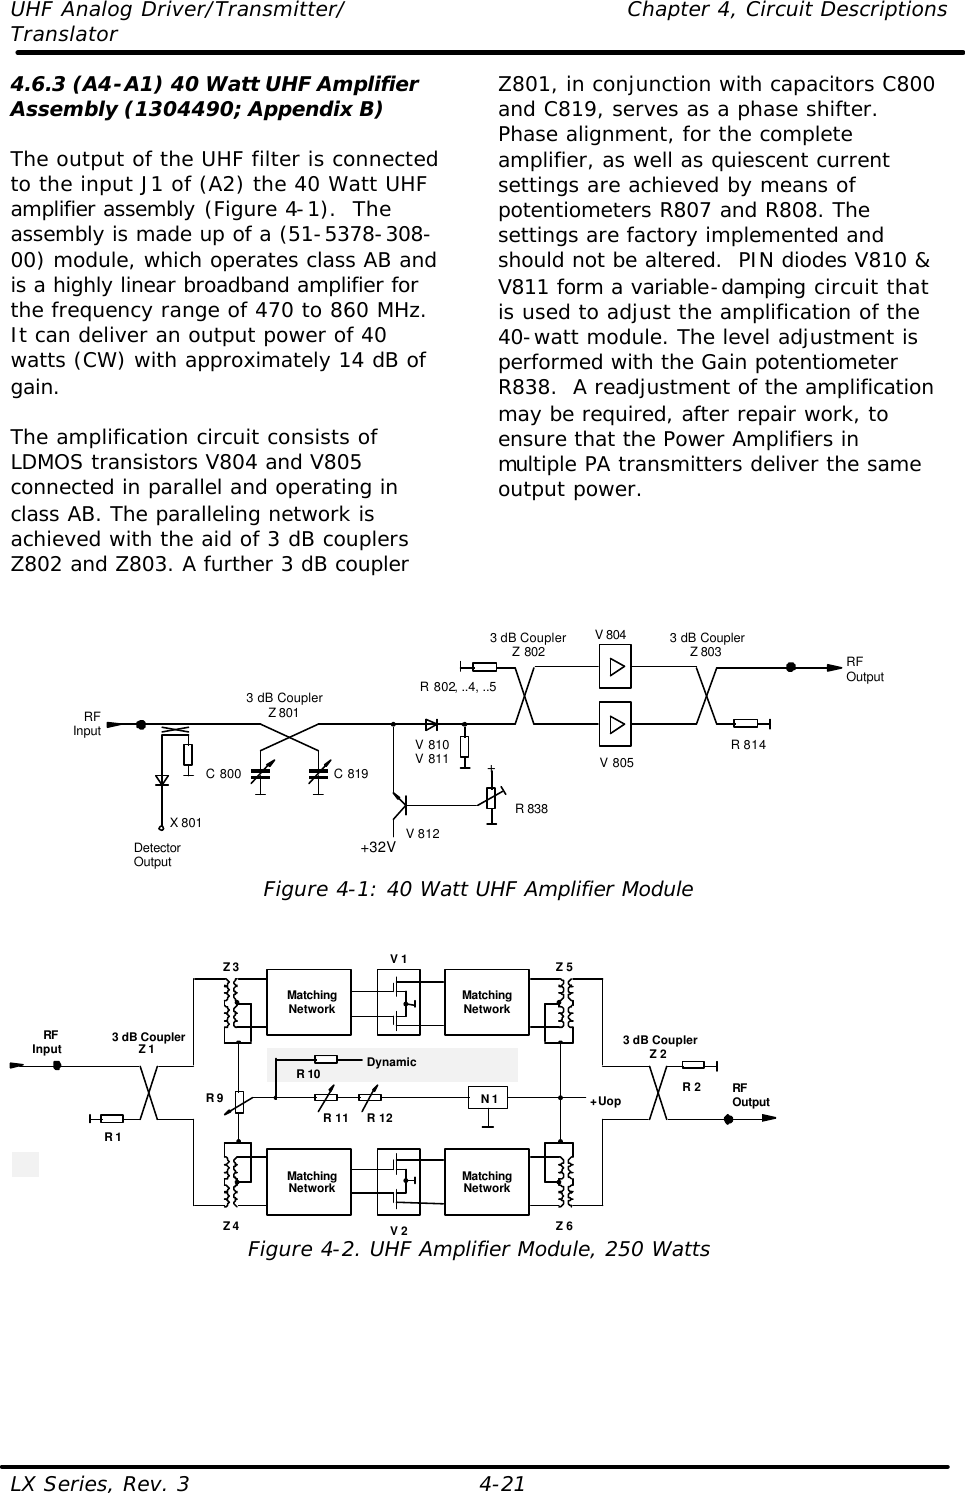 UHF Analog Driver/Transmitter/    Chapter 4, Circuit Descriptions Translator LX Series, Rev. 3    4-21 4.6.3 (A4-A1) 40 Watt UHF Amplifier Assembly (1304490; Appendix B)  The output of the UHF filter is connected to the input J1 of (A2) the 40 Watt UHF amplifier assembly (Figure 4-1).  The assembly is made up of a (51-5378-308-00) module, which operates class AB and is a highly linear broadband amplifier for the frequency range of 470 to 860 MHz. It can deliver an output power of 40 watts (CW) with approximately 14 dB of gain.  The amplification circuit consists of LDMOS transistors V804 and V805 connected in parallel and operating in class AB. The paralleling network is achieved with the aid of 3 dB couplers Z802 and Z803. A further 3 dB coupler Z801, in conjunction with capacitors C800 and C819, serves as a phase shifter. Phase alignment, for the complete amplifier, as well as quiescent current settings are achieved by means of potentiometers R807 and R808. The settings are factory implemented and should not be altered.  PIN diodes V810 &amp; V811 form a variable-damping circuit that is used to adjust the amplification of the 40-watt module. The level adjustment is performed with the Gain potentiometer R838.  A readjustment of the amplification may be required, after repair work, to ensure that the Power Amplifiers in multiple PA transmitters deliver the same output power.     V 805V 8043 dB CouplerZ 801RFOutputRFInput R 814R 802, ..4, ..5C 800 C 819DetectorOutputX 801+32V+R 838V 810V 811V 8123 dB CouplerZ 802 3 dB CouplerZ 803 Figure 4-1: 40 Watt UHF Amplifier Module  V 13 dB CouplerZ 2RFOutputRFInput 3 dB CouplerZ 1R 2R 1MatchingNetworkMatchingNetworkV 2MatchingNetworkMatchingNetworkZ 3 Z 5Z 4 Z 6+UopN 1R 11 R 12R 9R 10 DynamicEqualization Figure 4-2. UHF Amplifier Module, 250 Watts  